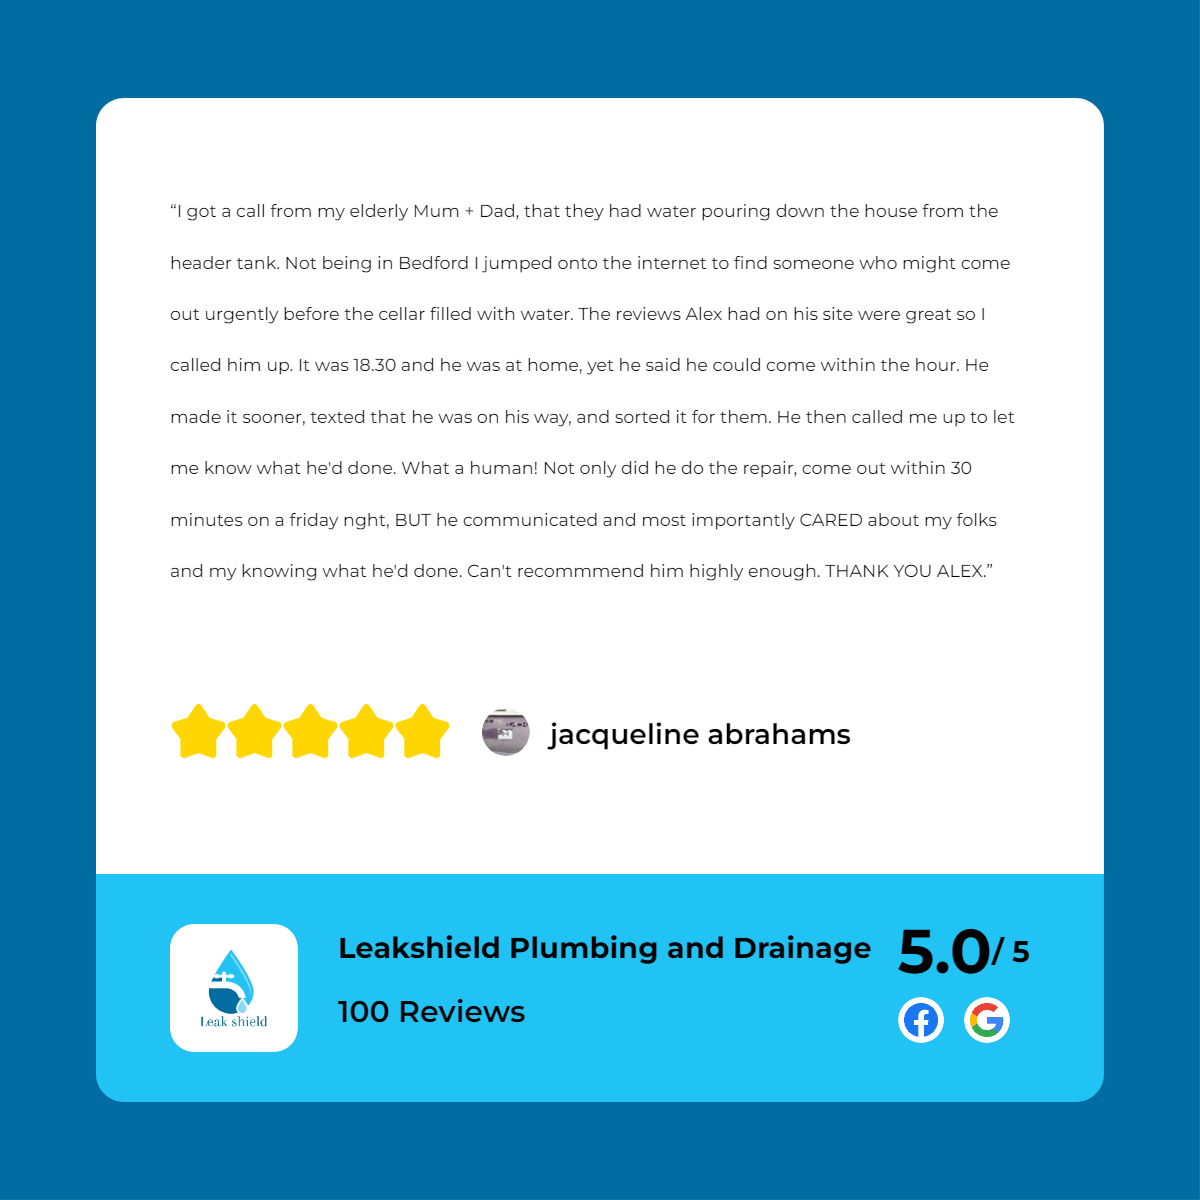 A customer review for a plumbing and drainage company.